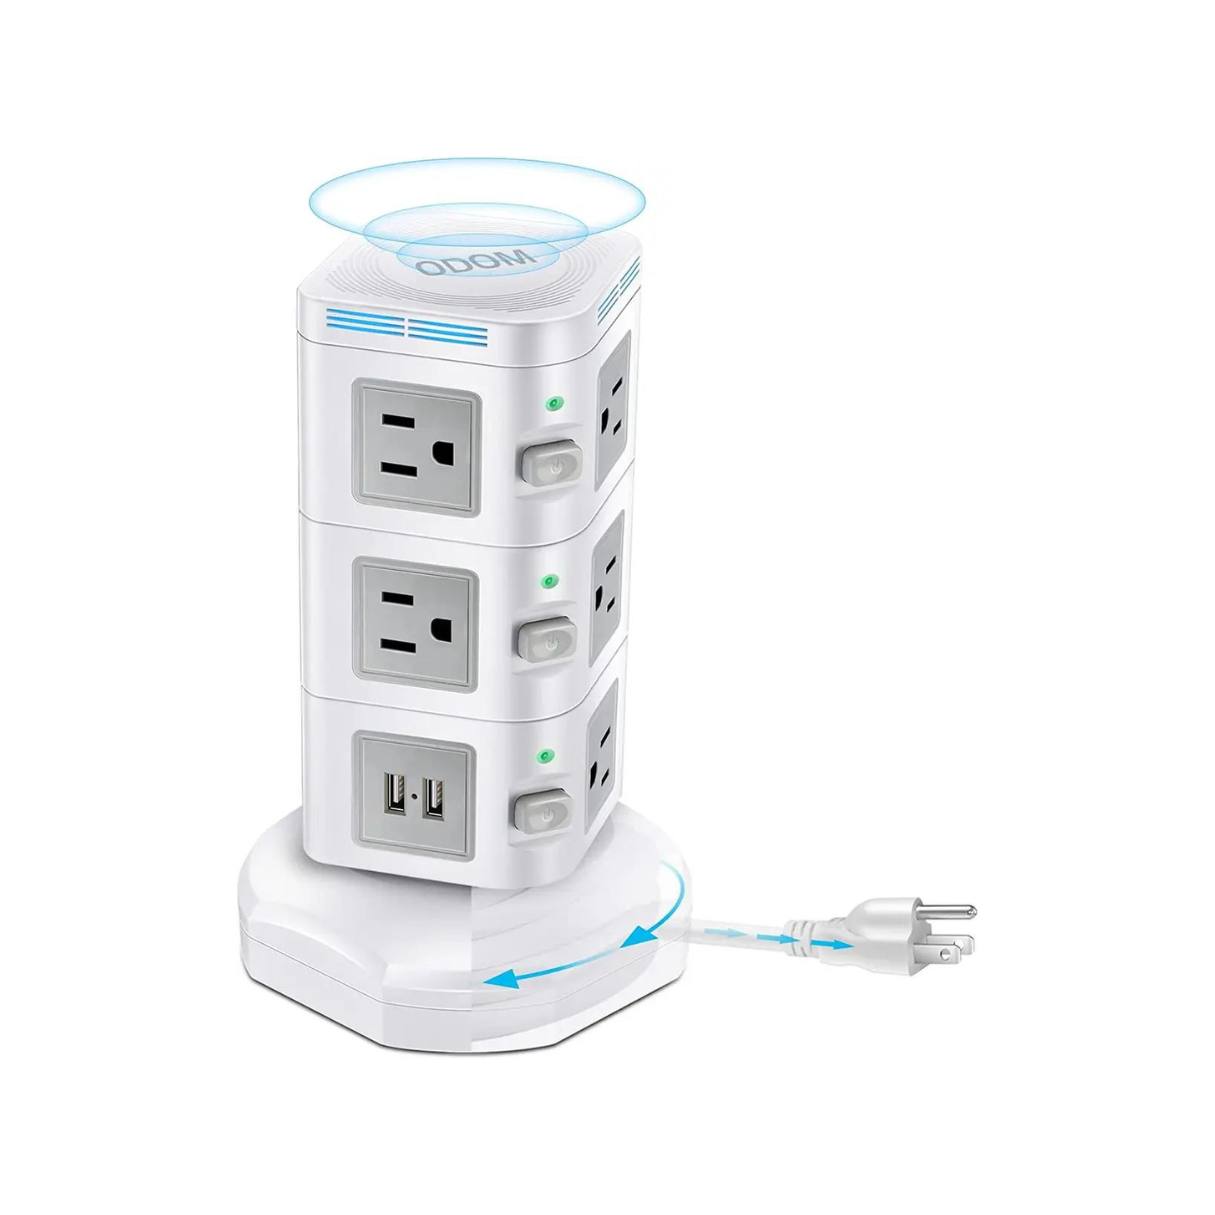 BESTEK Wireless Charger Desktop Power Strip with 8 Outlets and 3